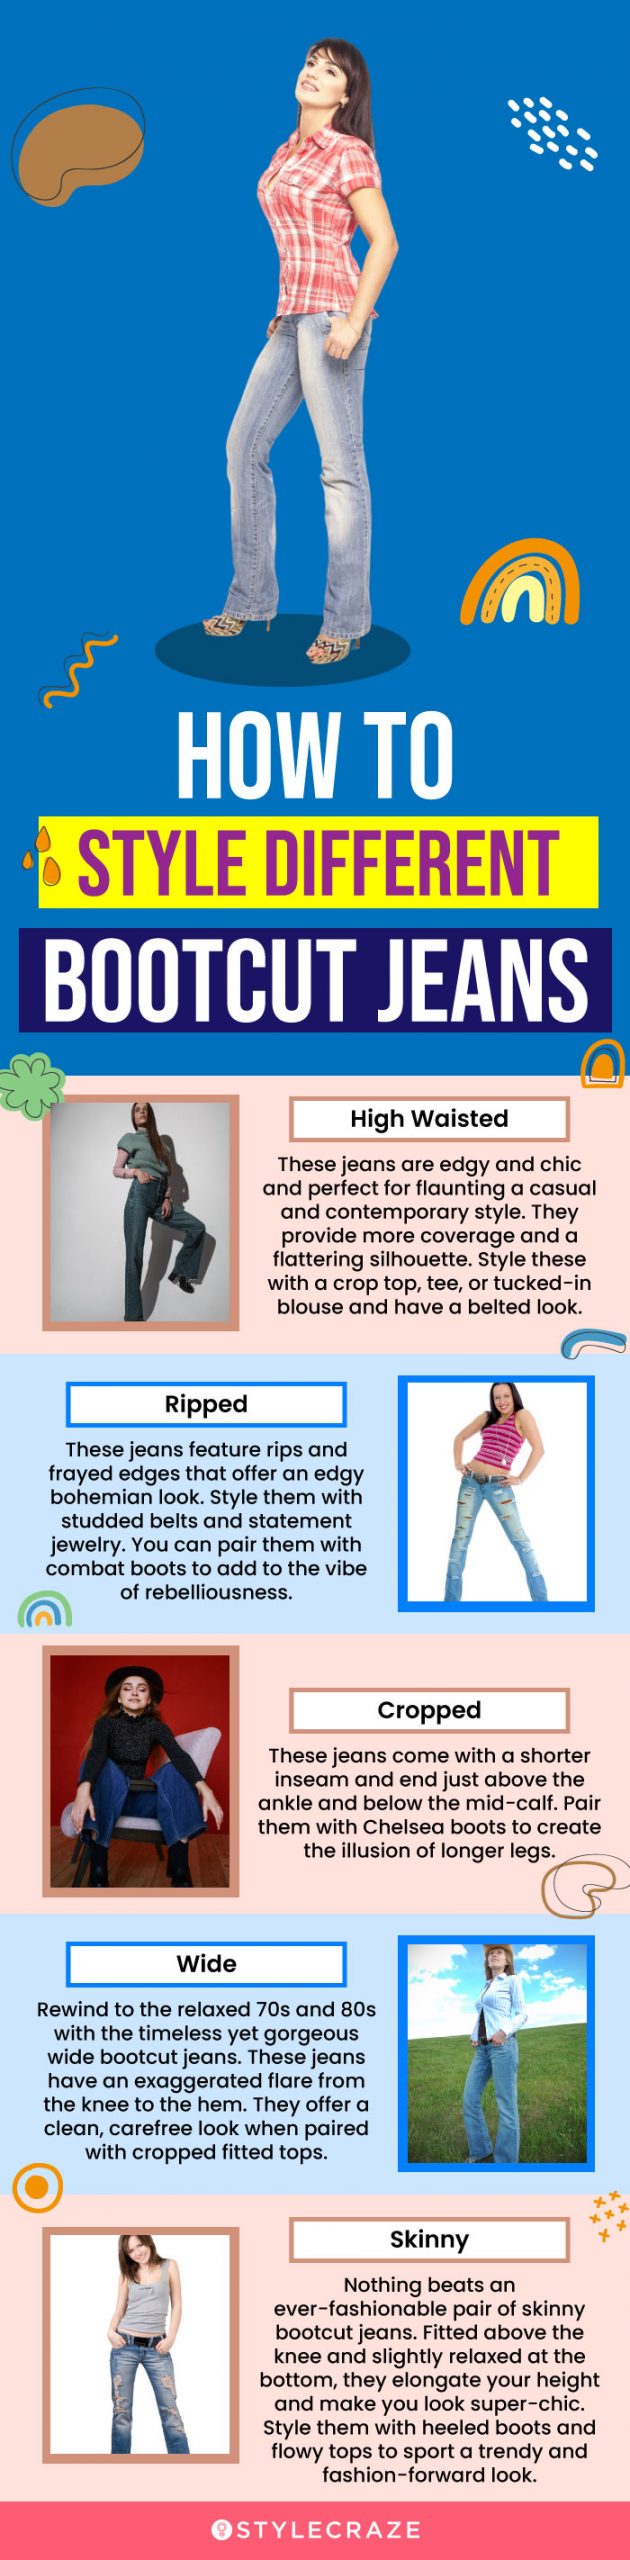 How To Style Different Bootcut Jeans (infographic)